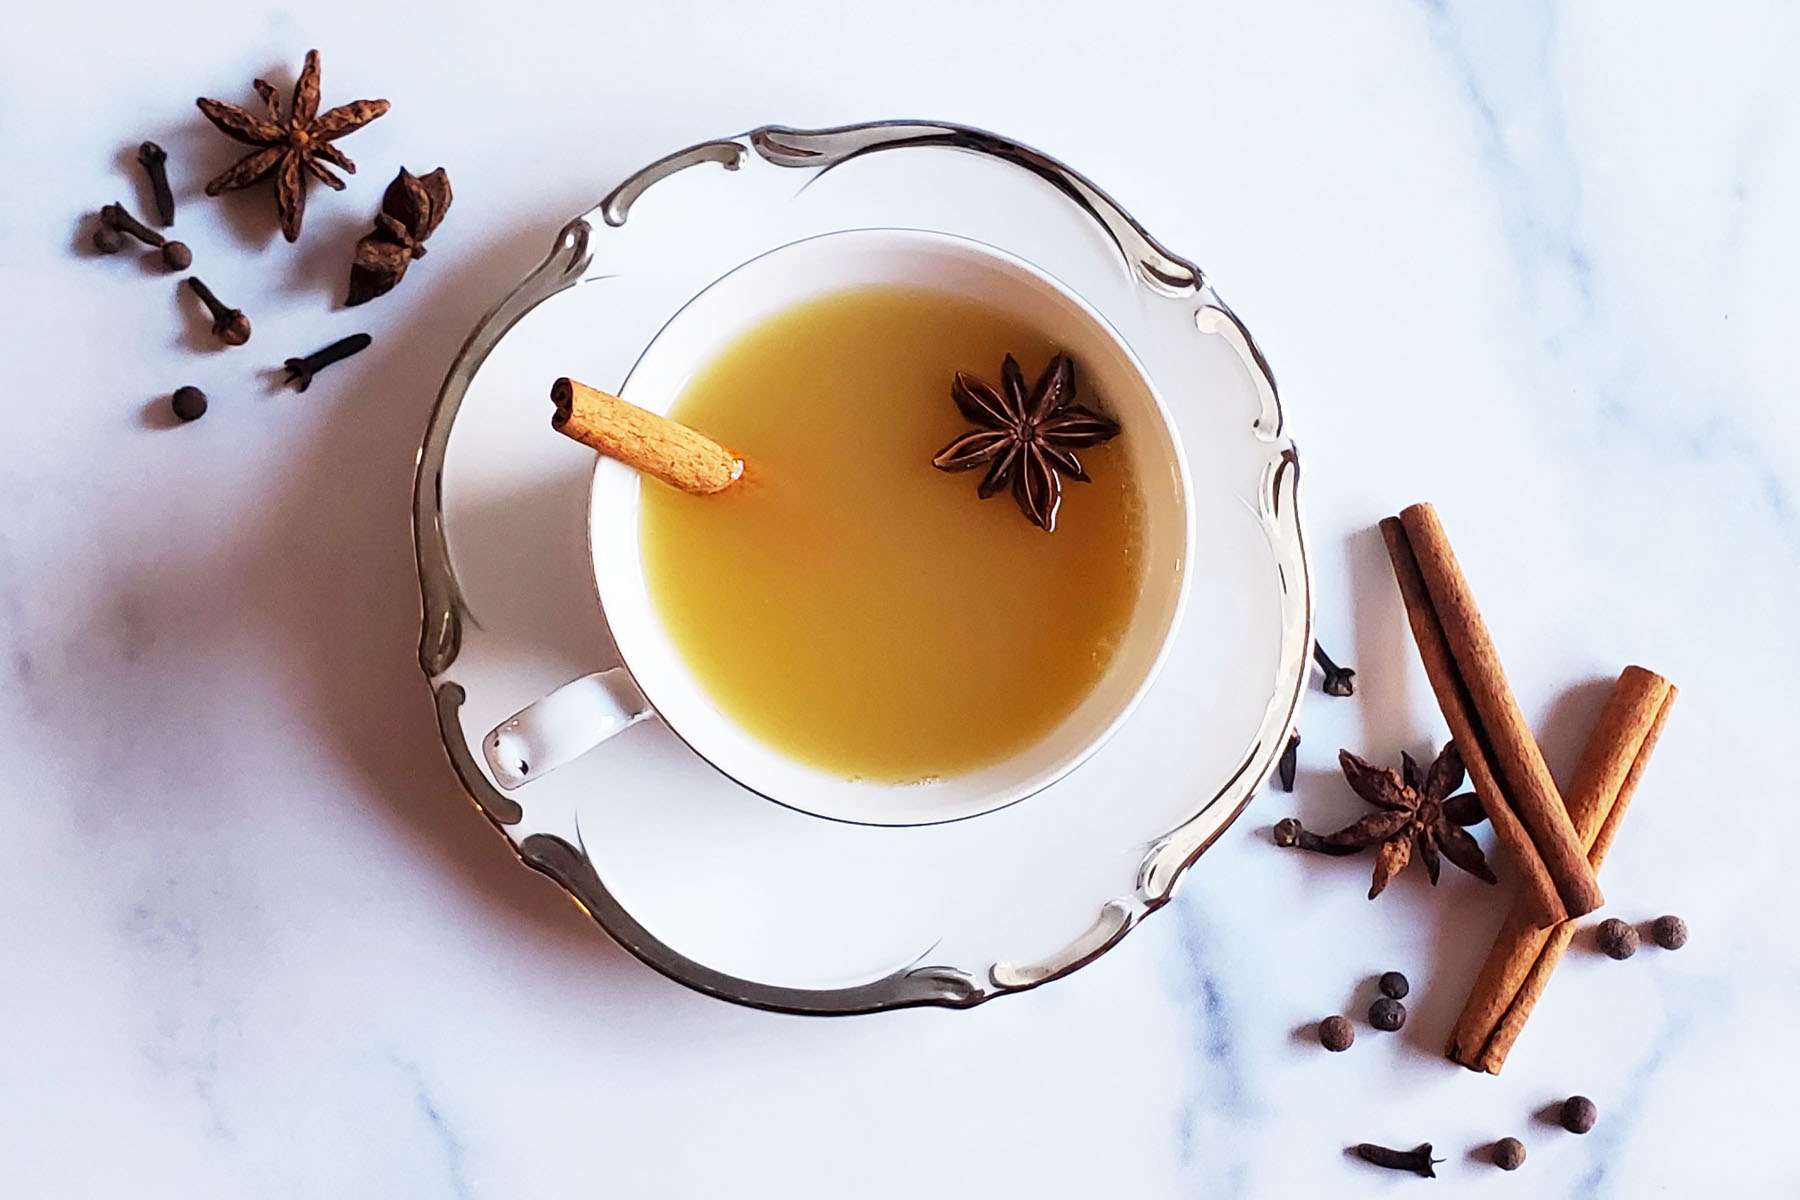 An antique teacup on a saucer, filled with wassail, a cinnamon stick and one star anise. It is in a marble counter, surrounding the cup are more spices, cinnamon sticks, clove, allspice berries and star anise.